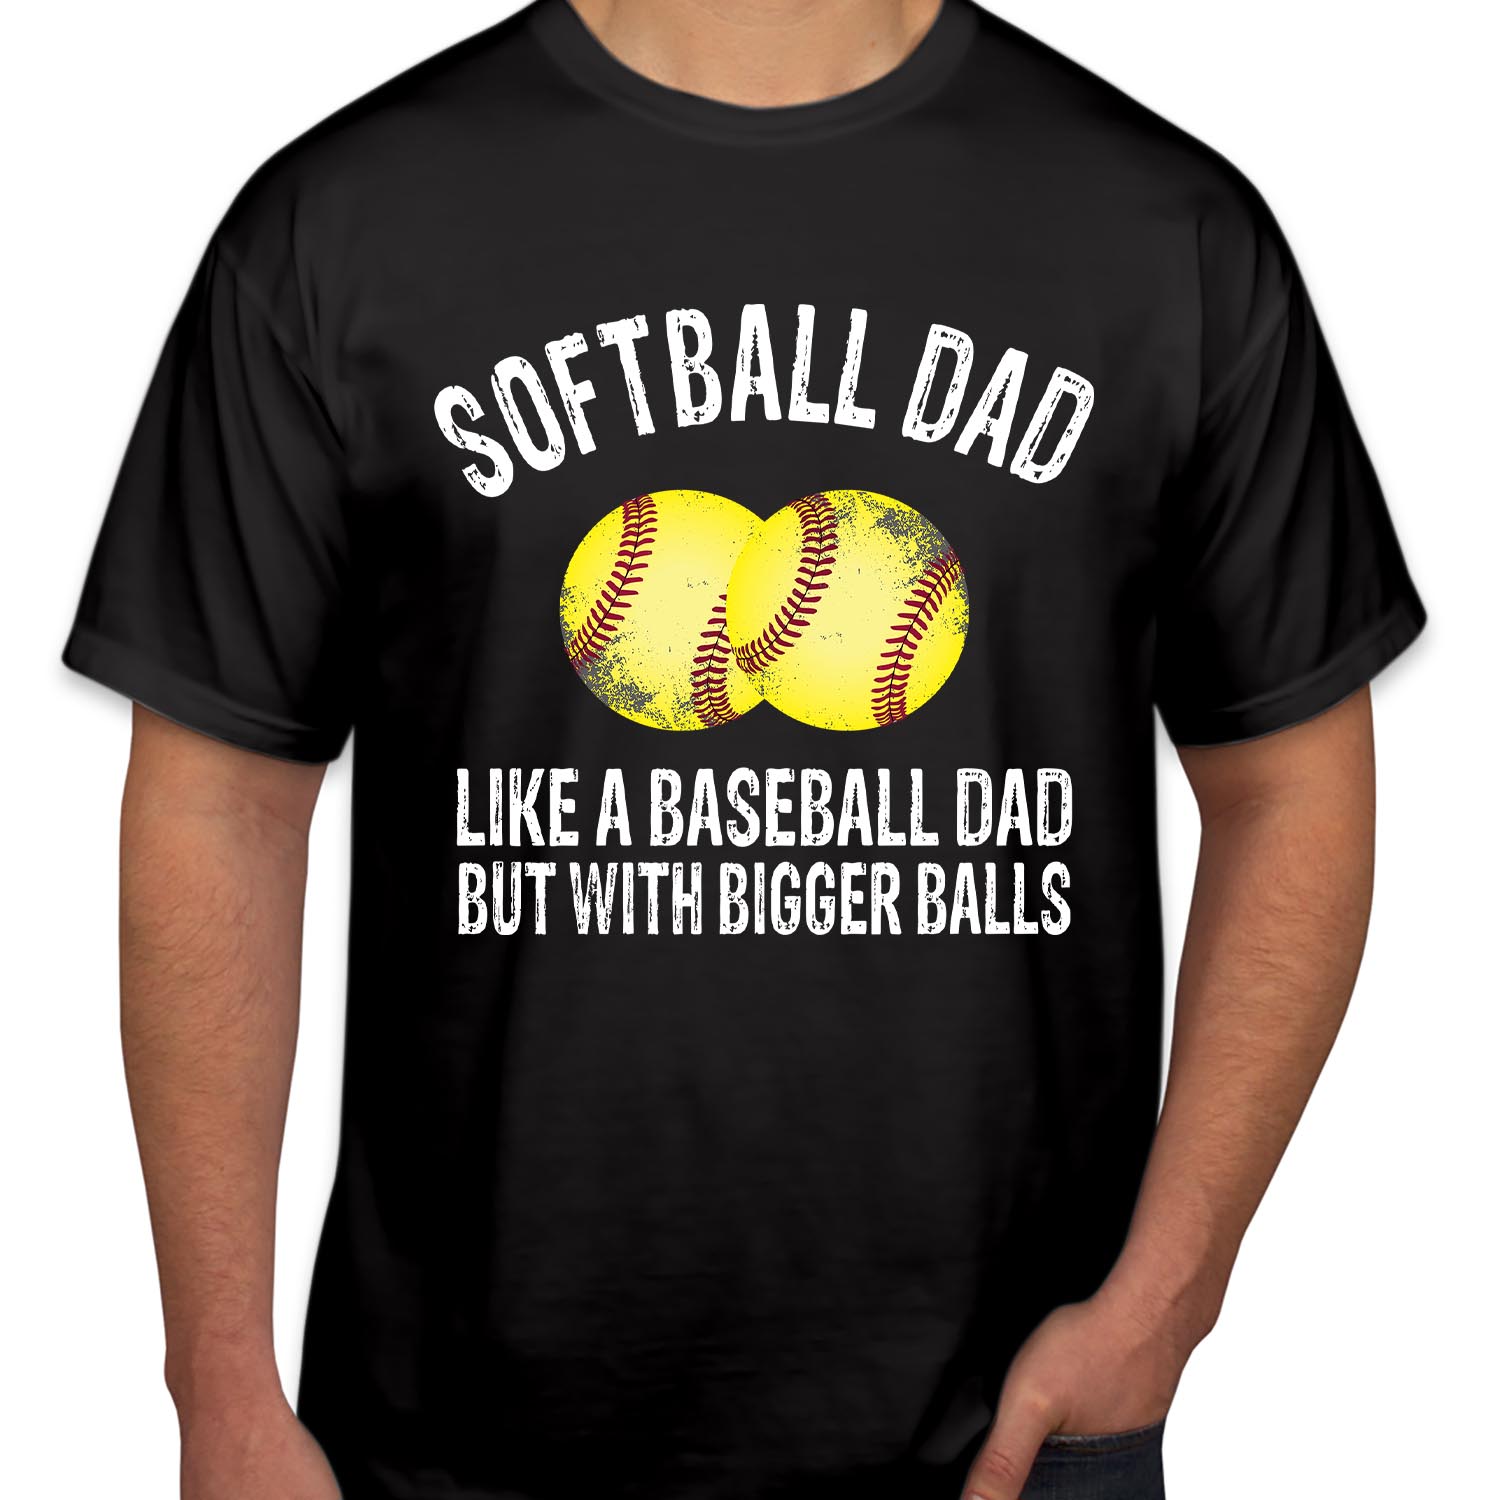 Softball Dad like a Baseball Dad but with Bigger Balls Funny Father's Day T-Shirt Perfect Gift for Celebrating Fathers Day Men Women Unisex T Shirt